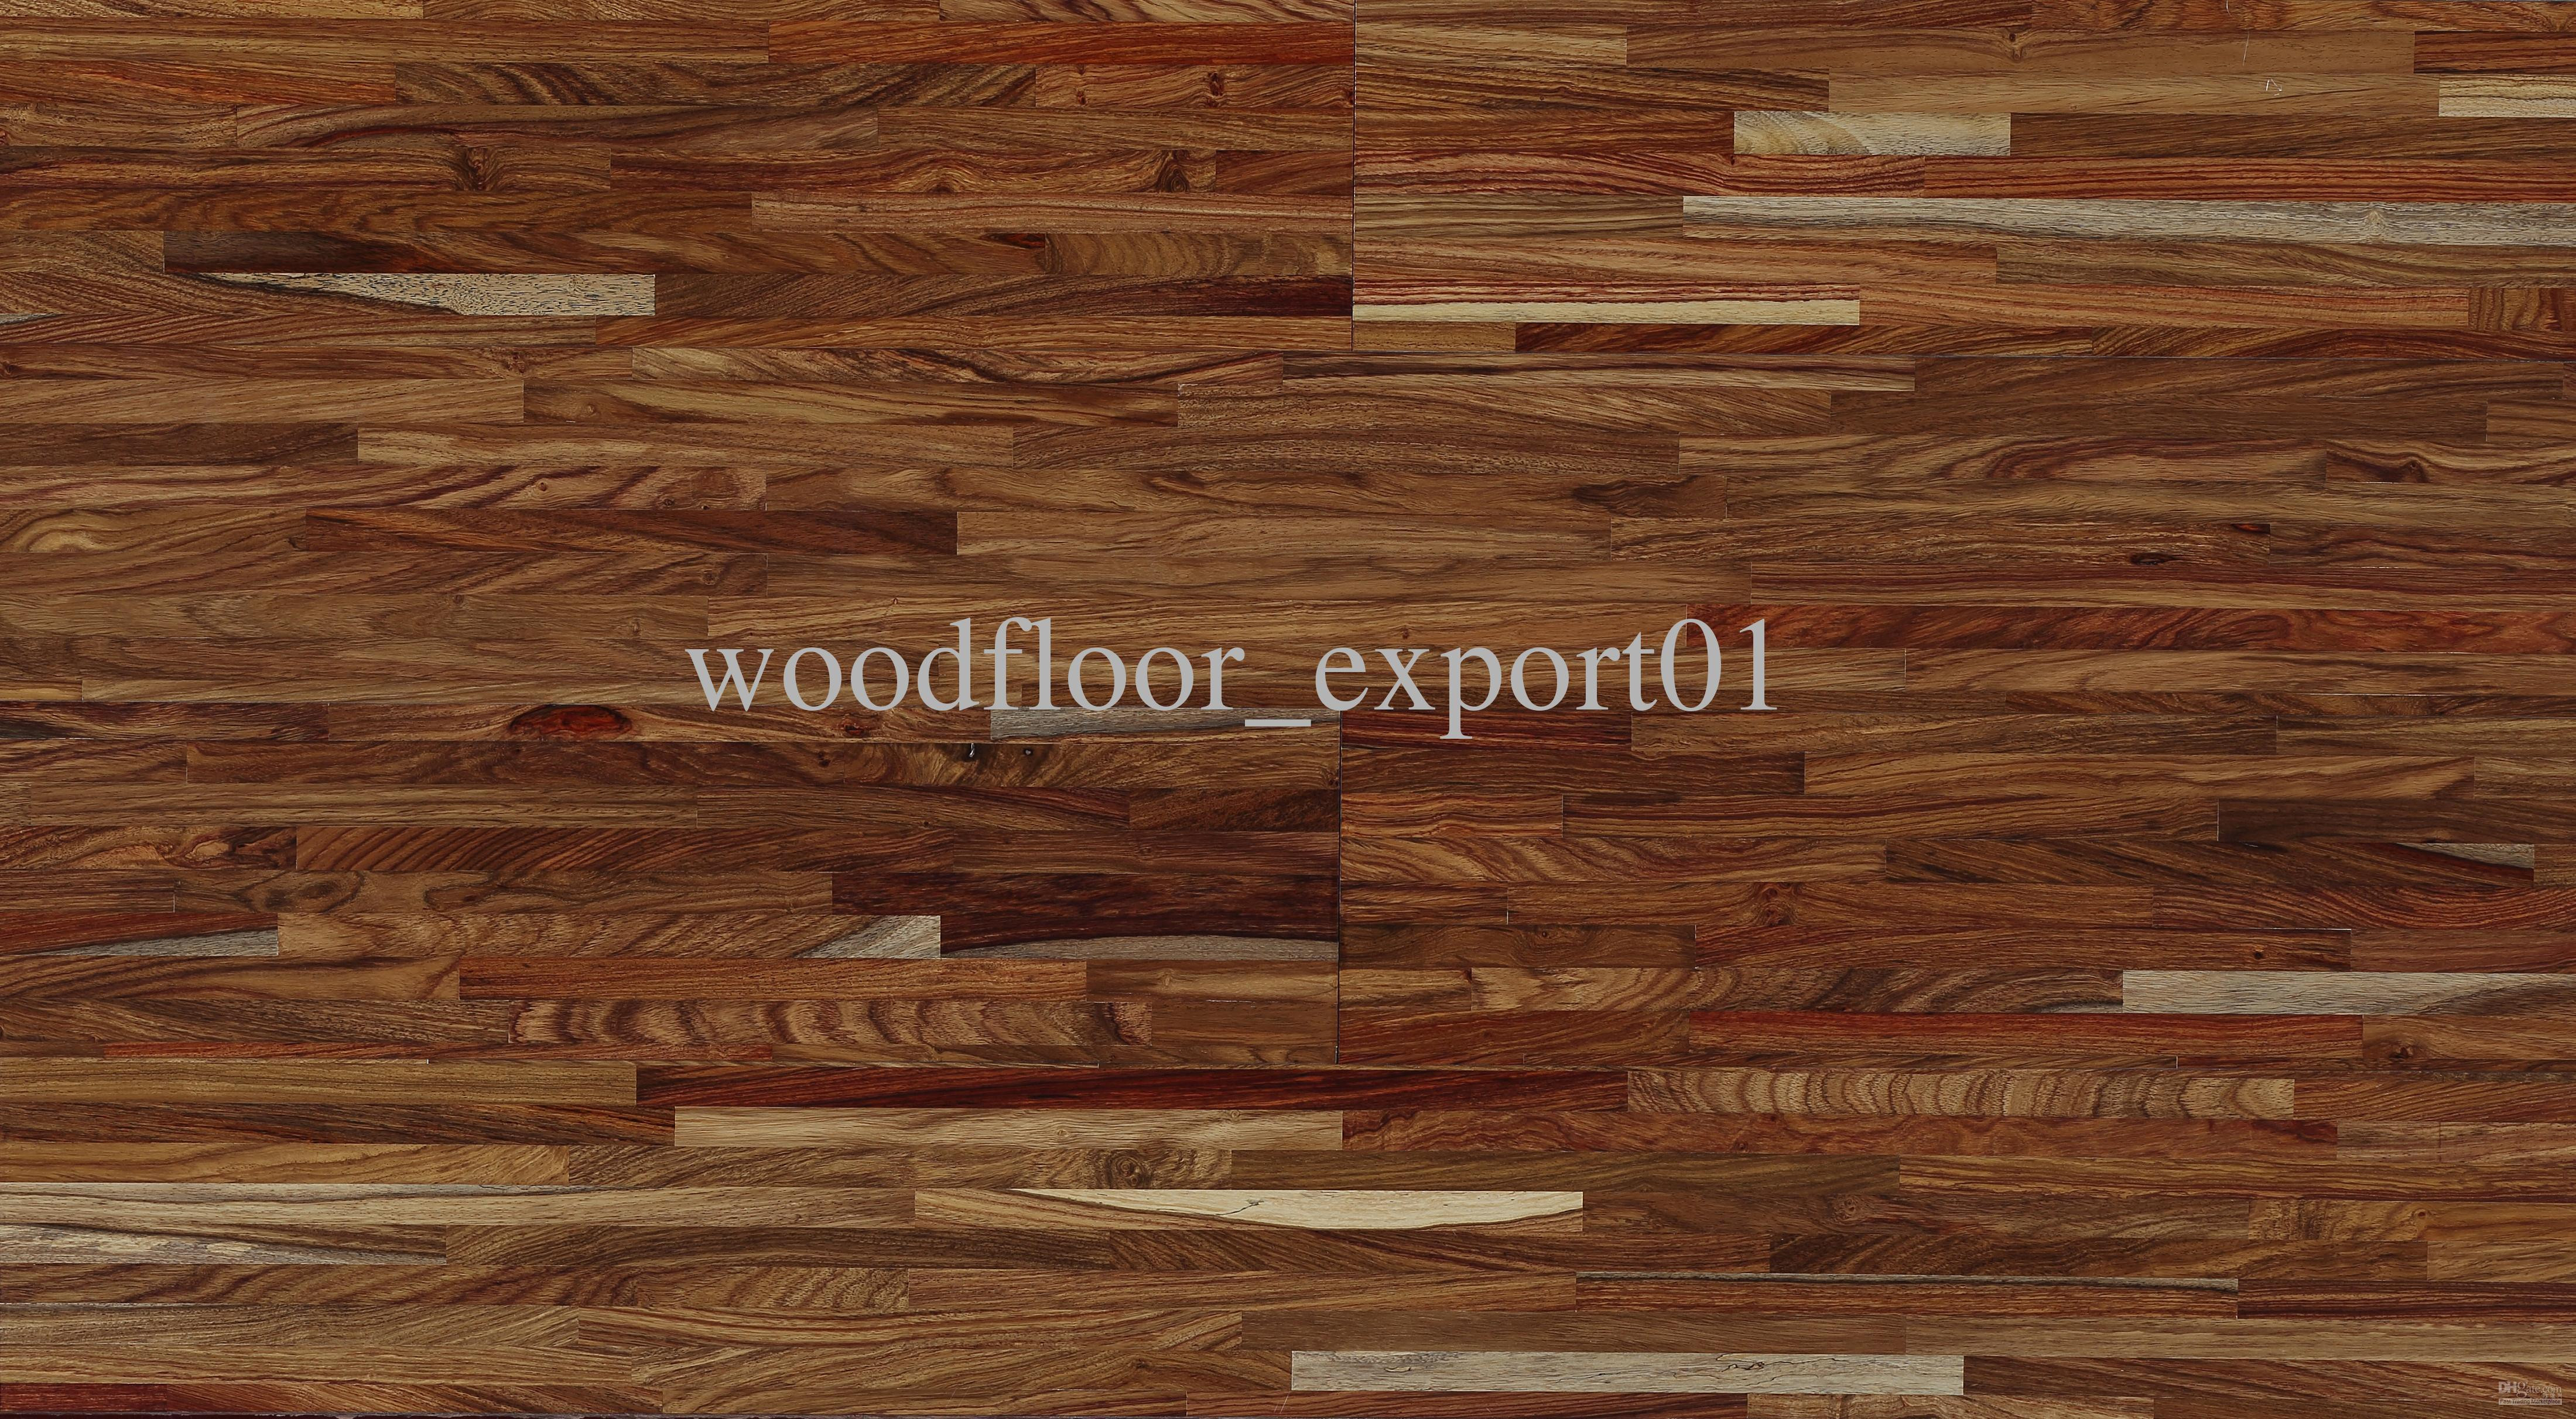 weight of hardwood flooring of rosewood hardwood flooring large living room floor european style with regard to features specifications rosewood parquet wood flooring paintpu uv anti scratch painting gloss satin or semi gloss